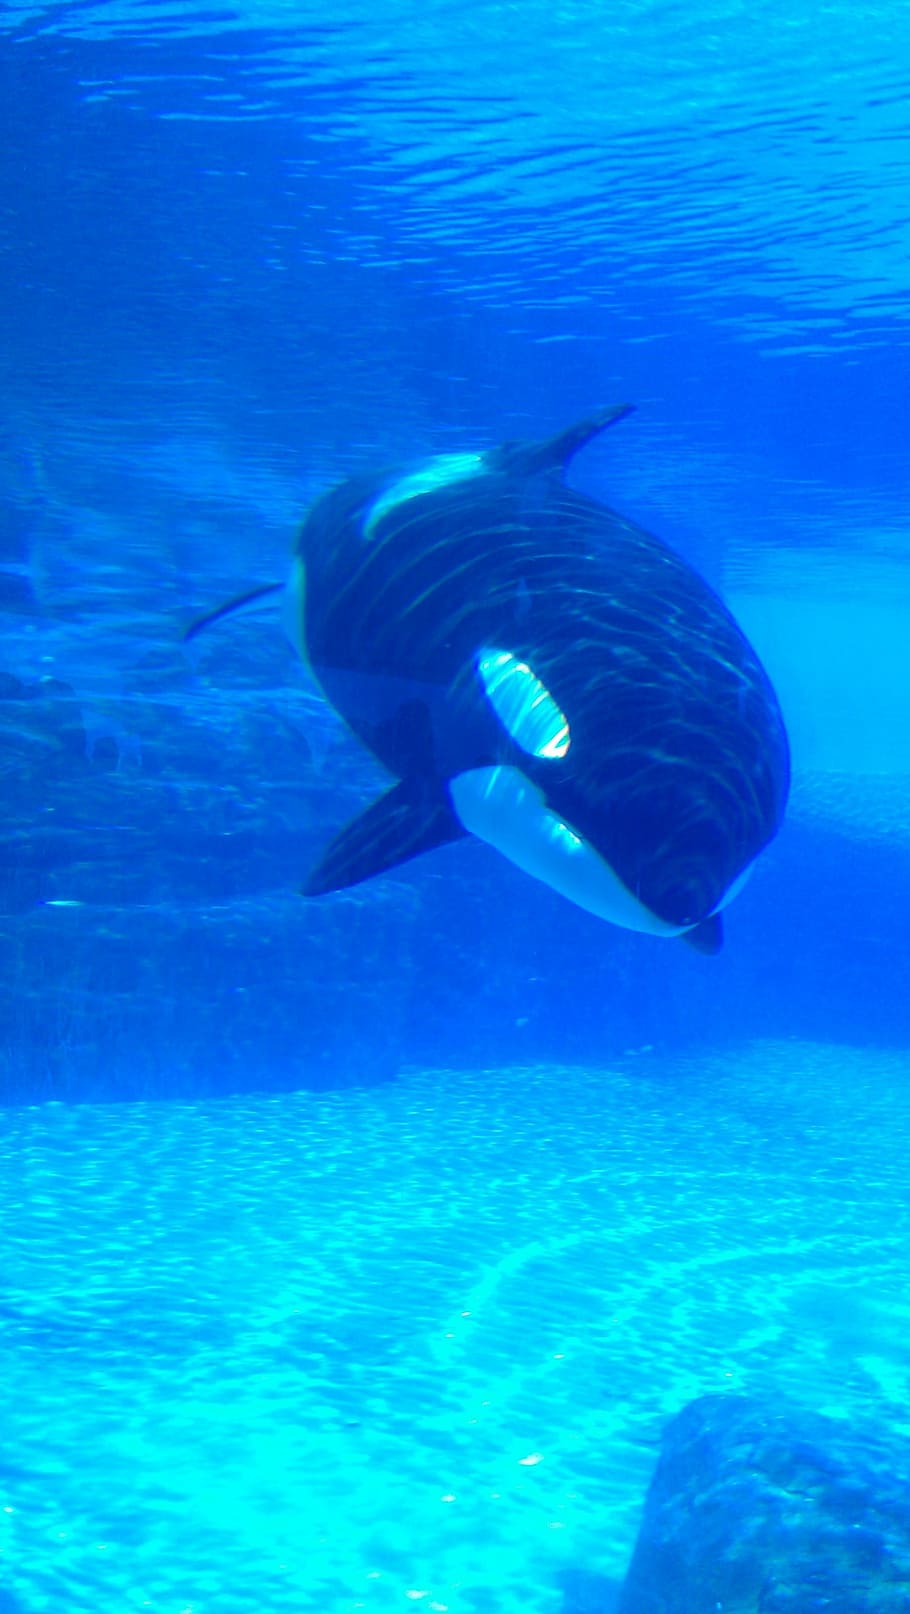 underwater, photography, whale, orca, killer whale, water, marine, sea, animals in the wild, animal themes